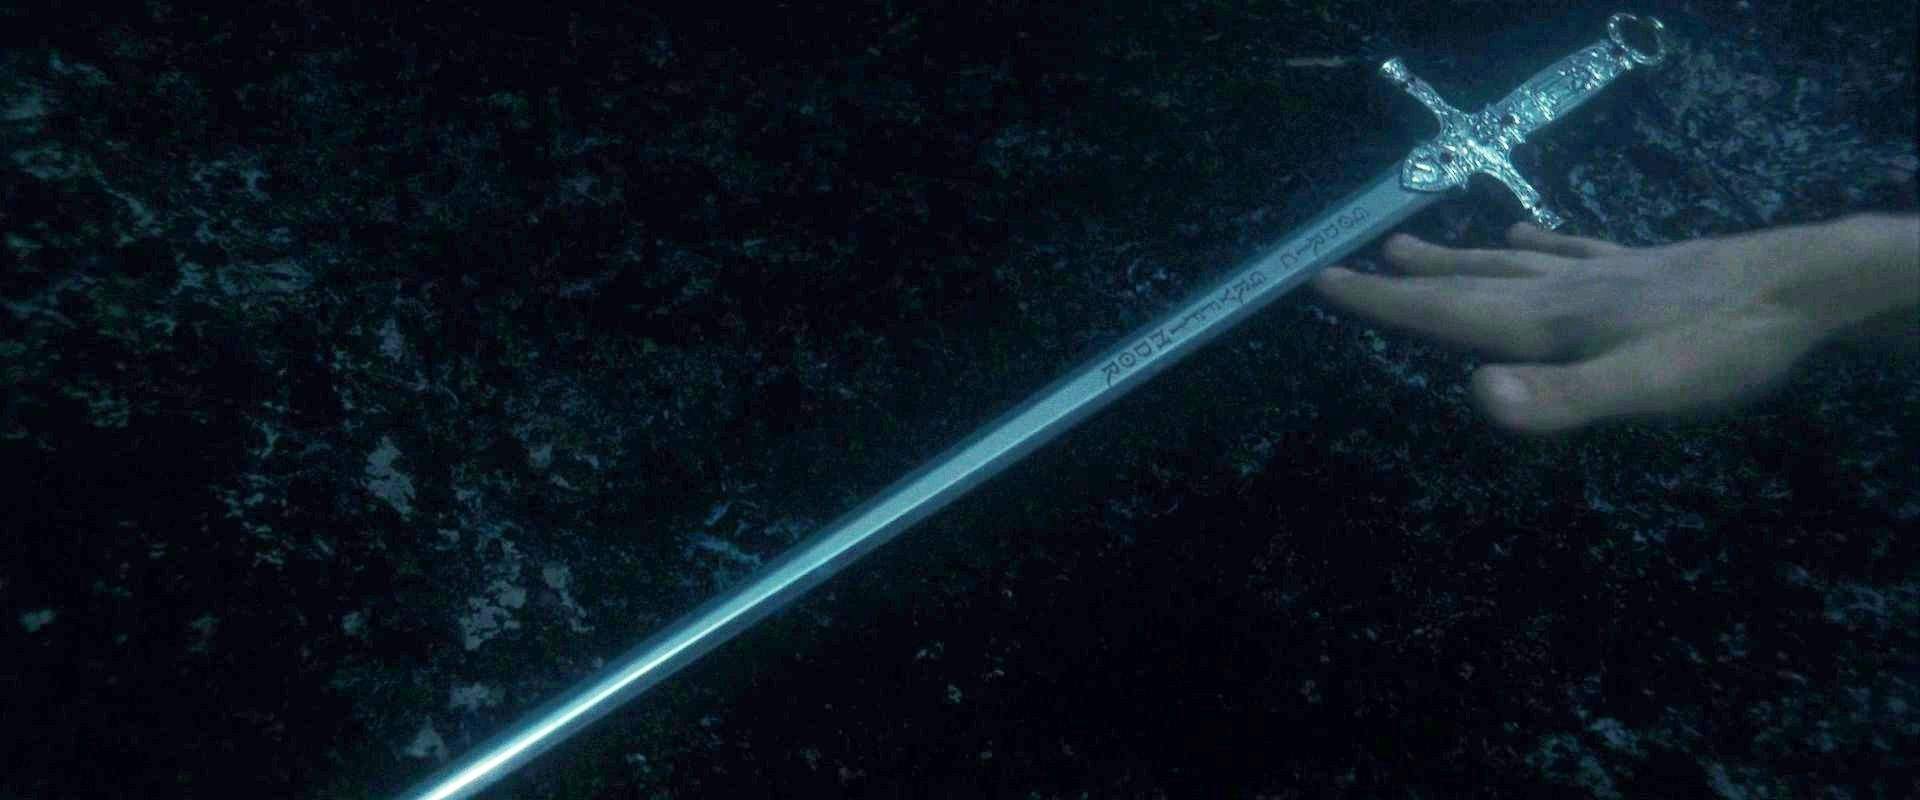 The Gryffindor Sword is another item left by the founder of the house.